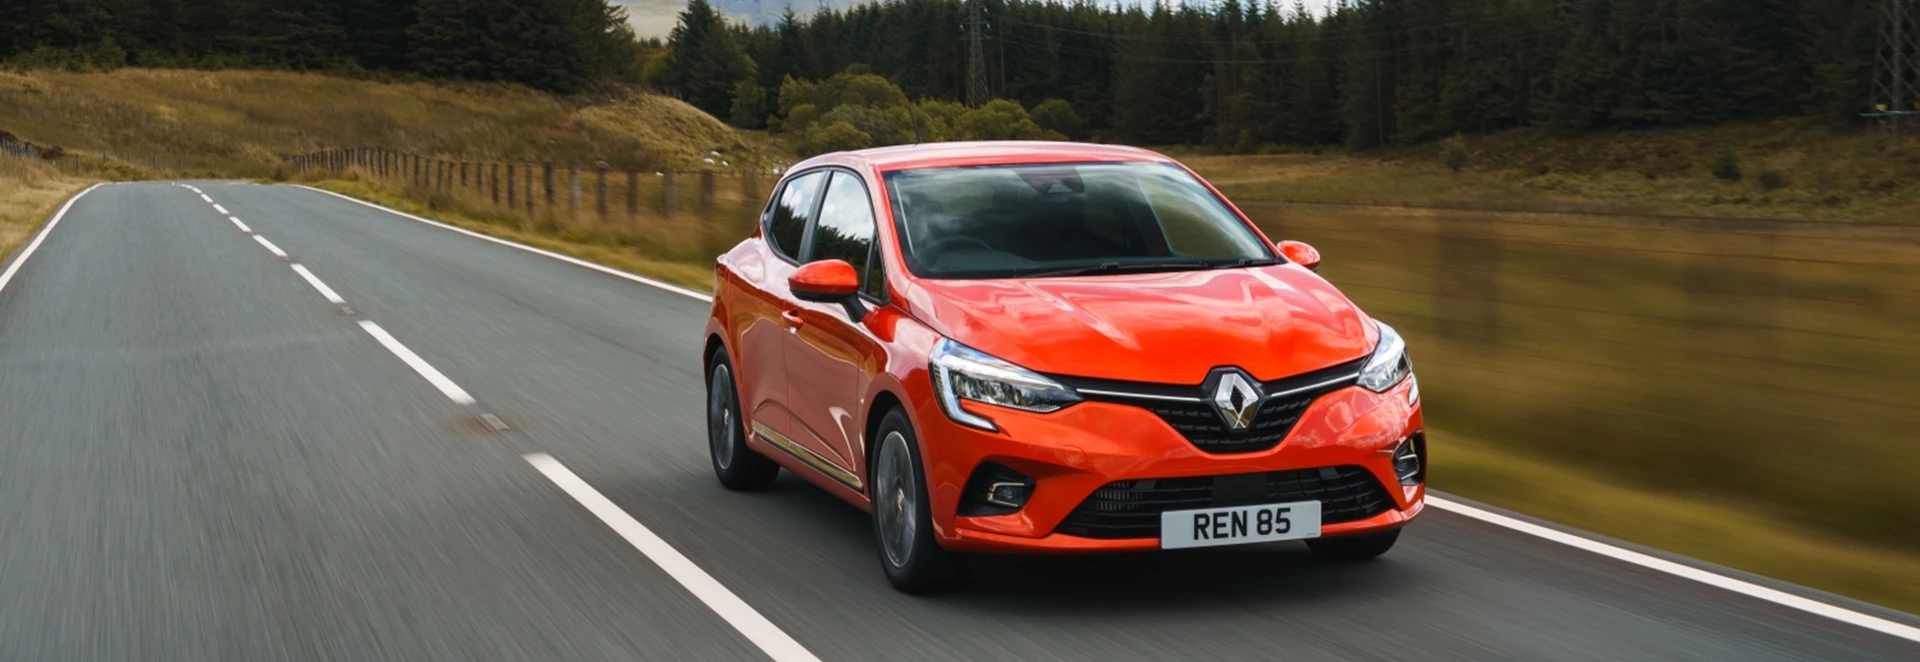 Buyer’s guide to the Renault Clio